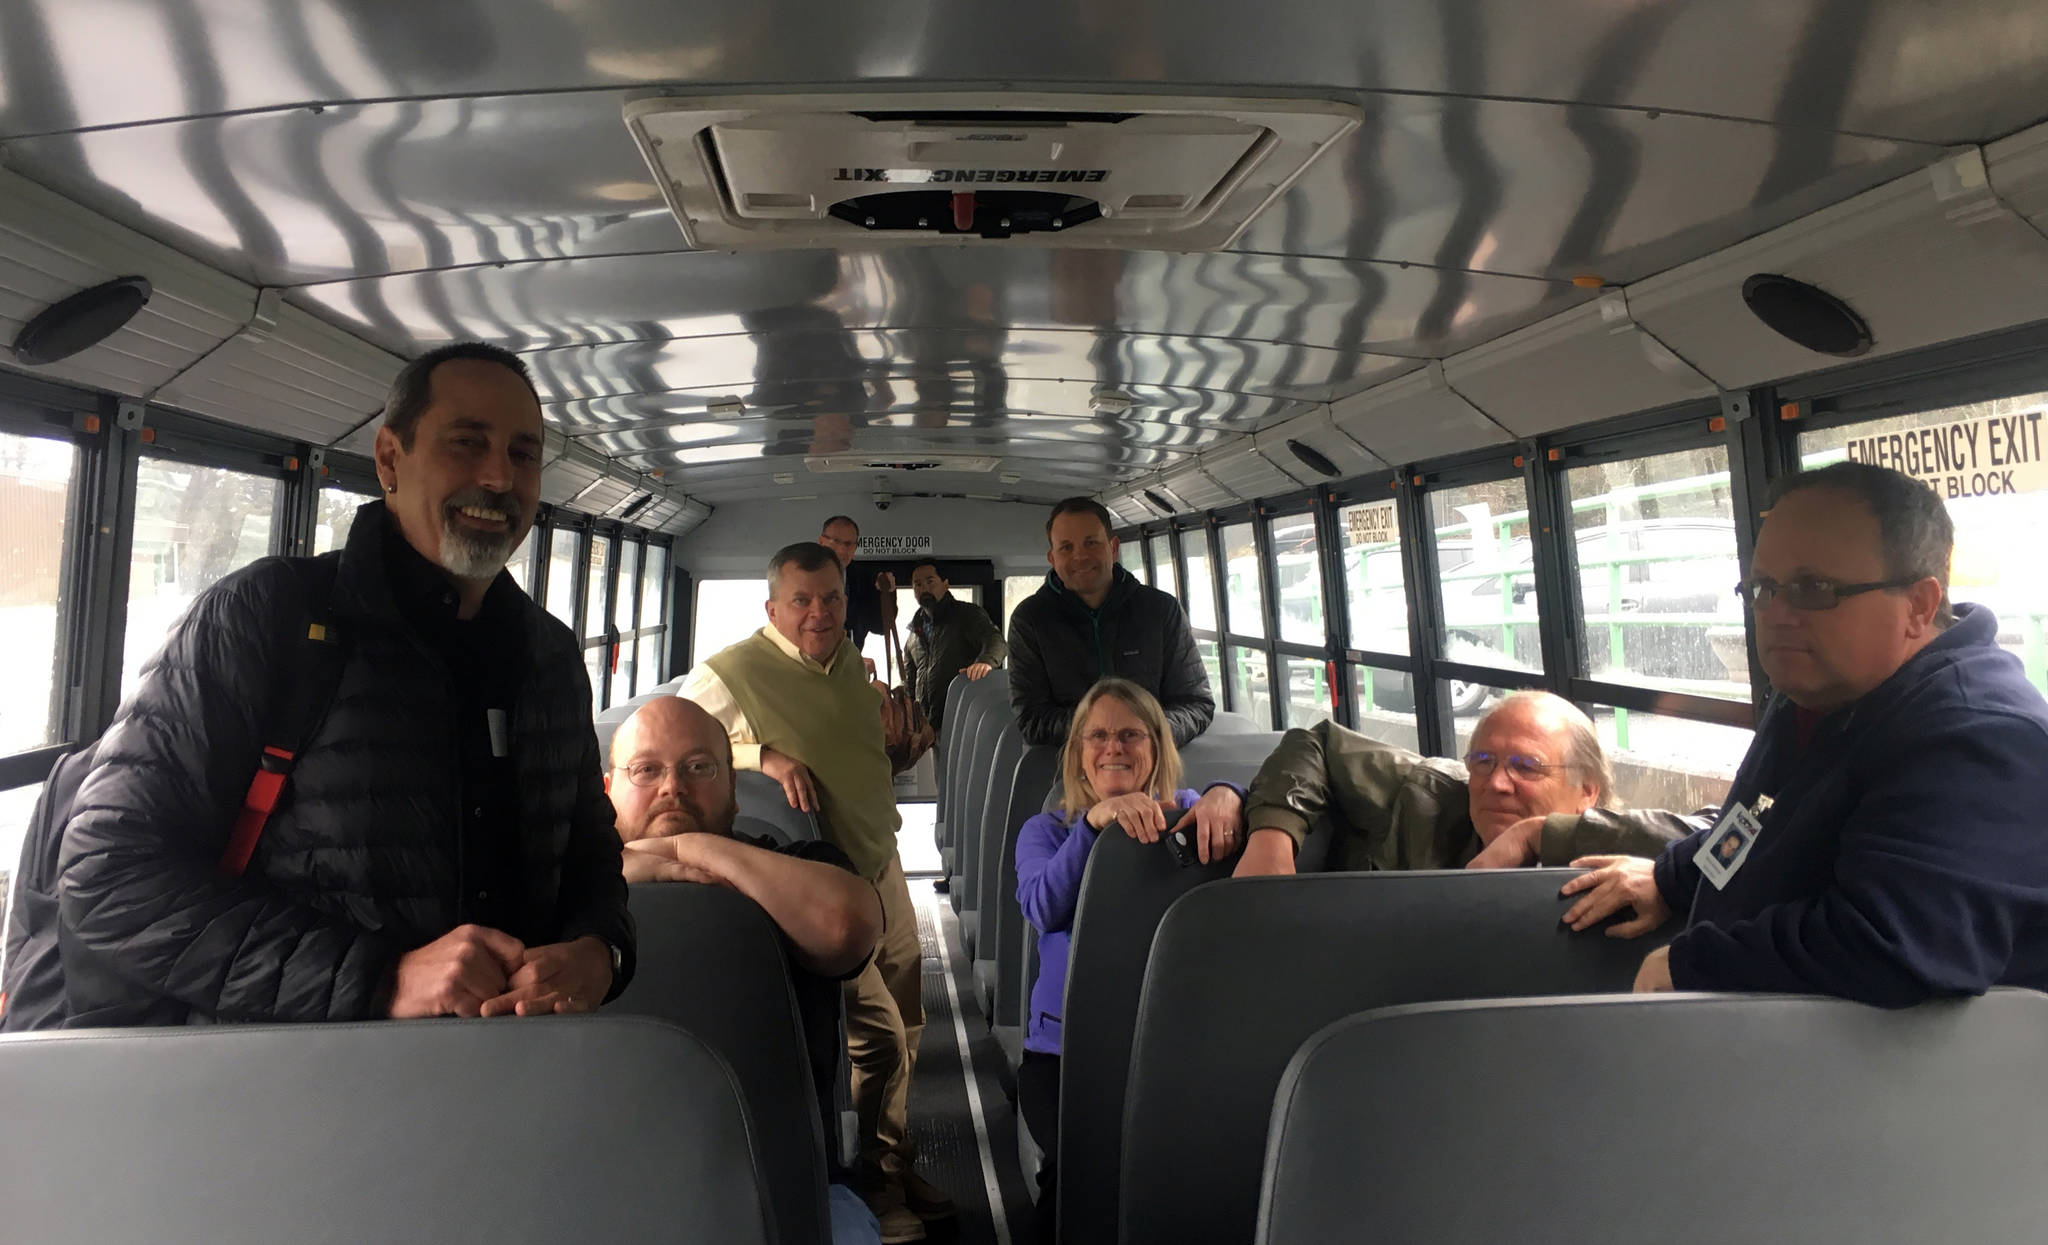 The Kenai Peninsula Borough School District Board of Education members took a ride on one of the district’s new buses from Seward High School to Seward Middle School on Monday, May 1, 2017 in Seward, Alaska. (Kat Sorensen/Peninsula Clarion)